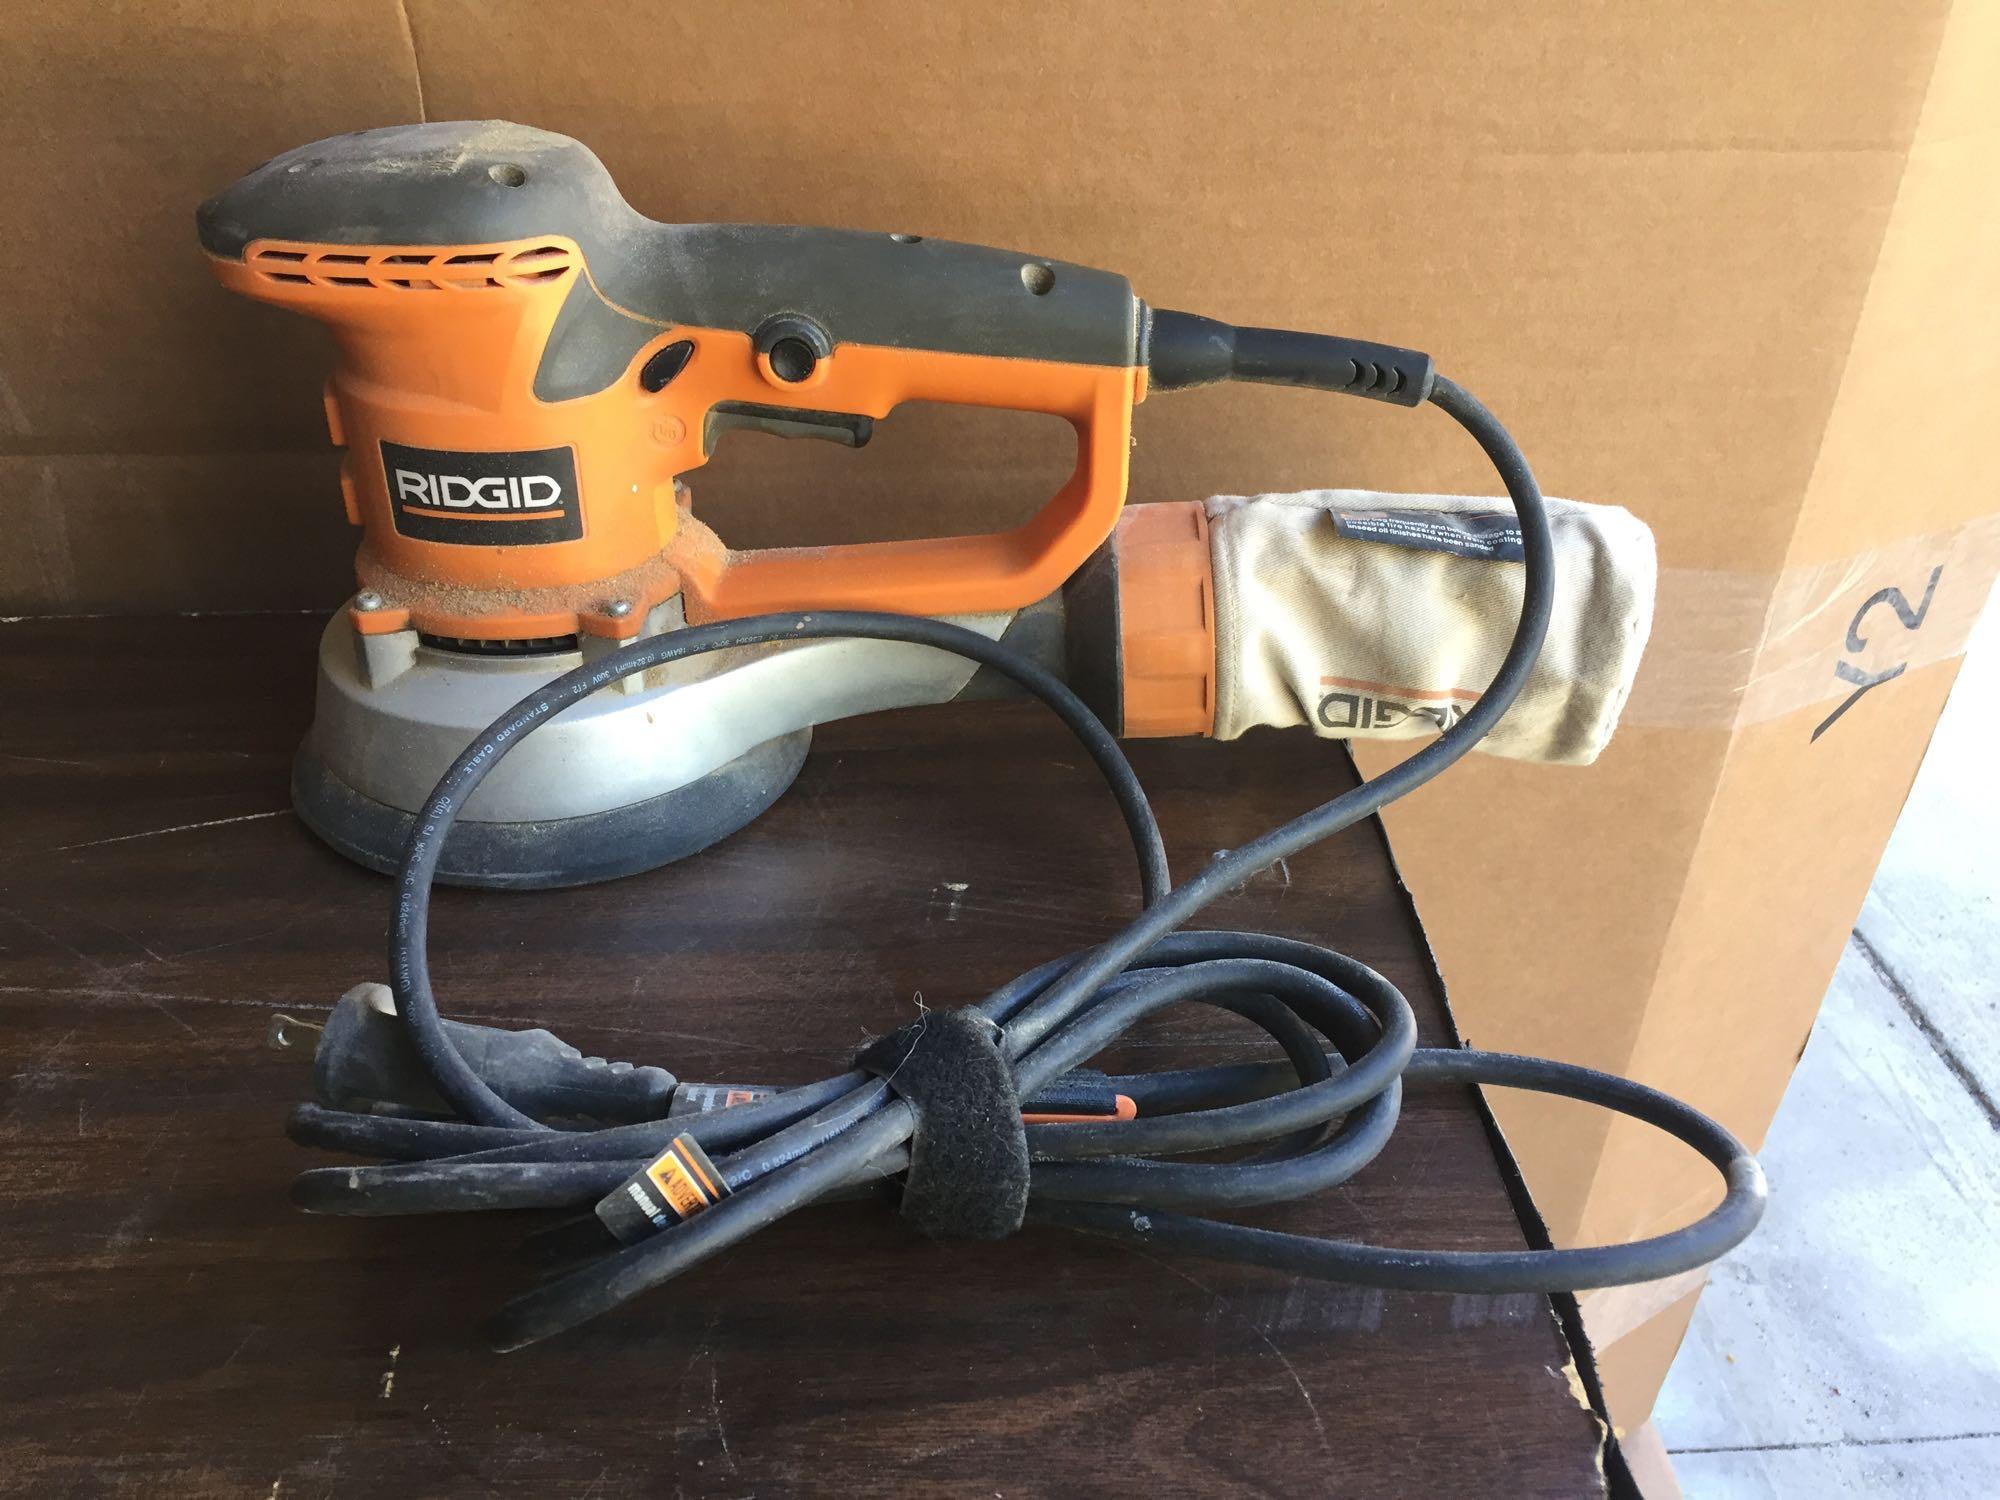 Tool and Contractor Equipment Auction